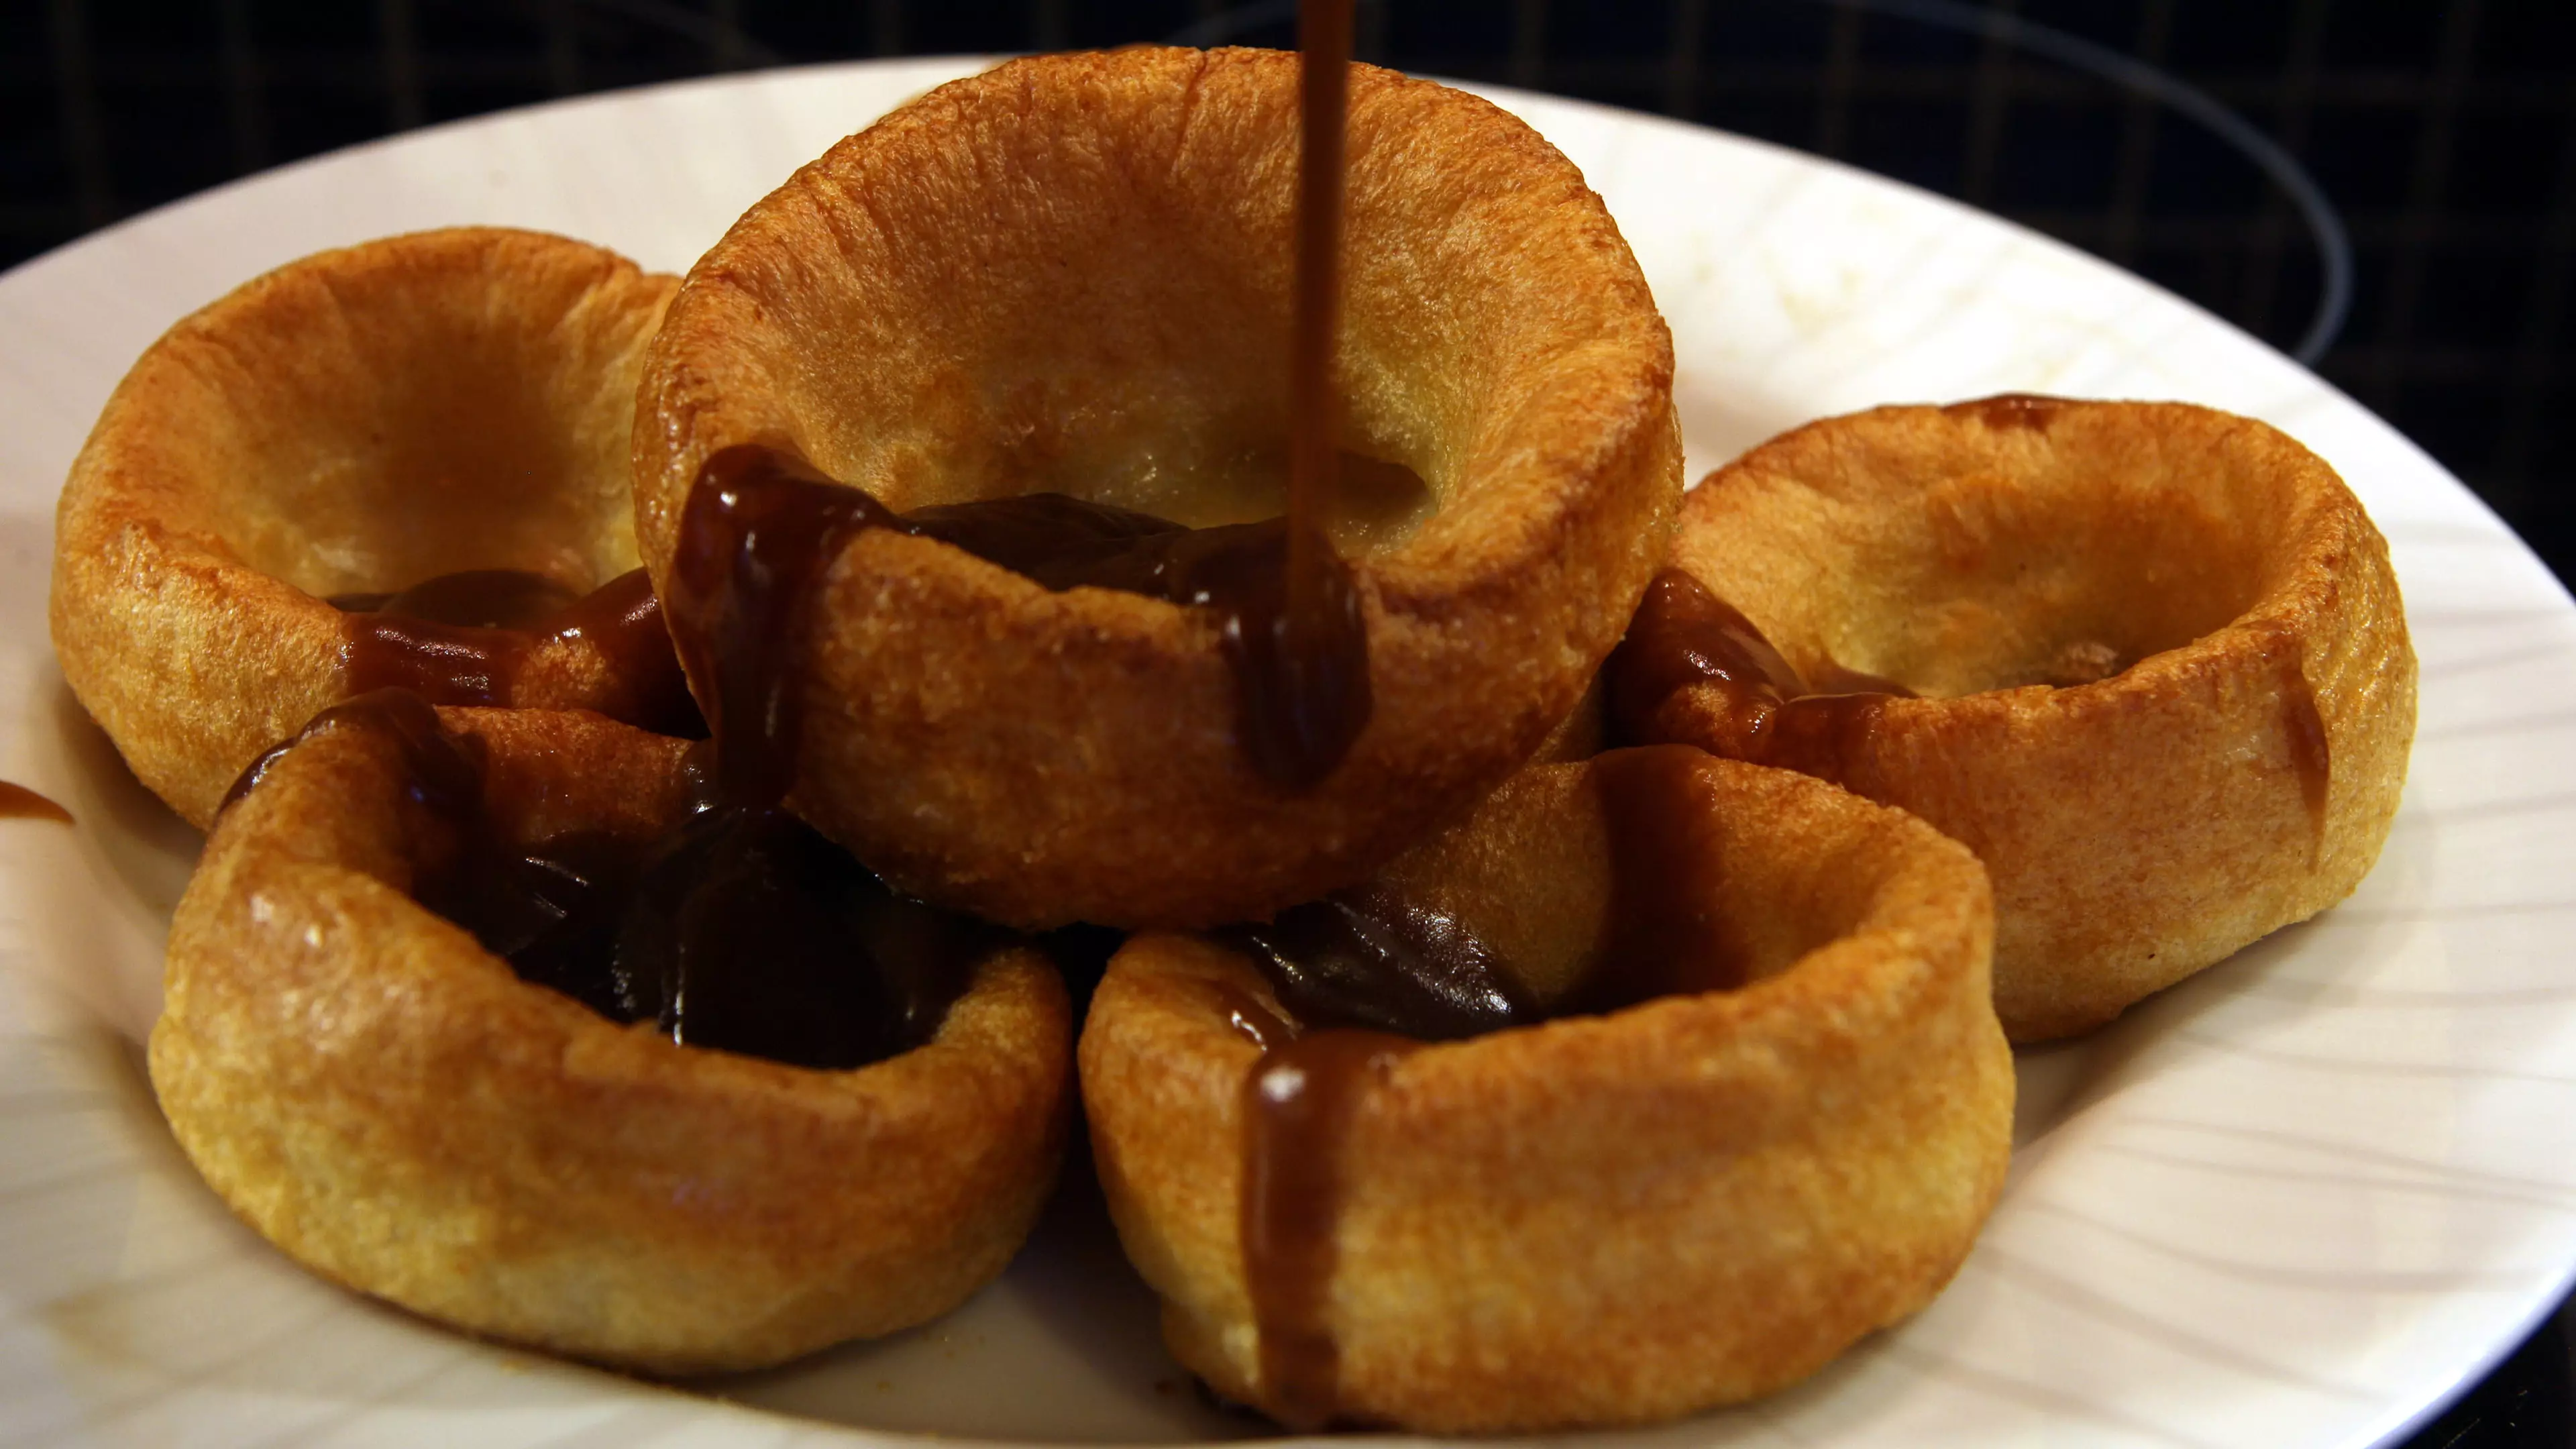 Over Three Quarters Of People Think That Yorkshire Puddings Go On Christmas Dinner